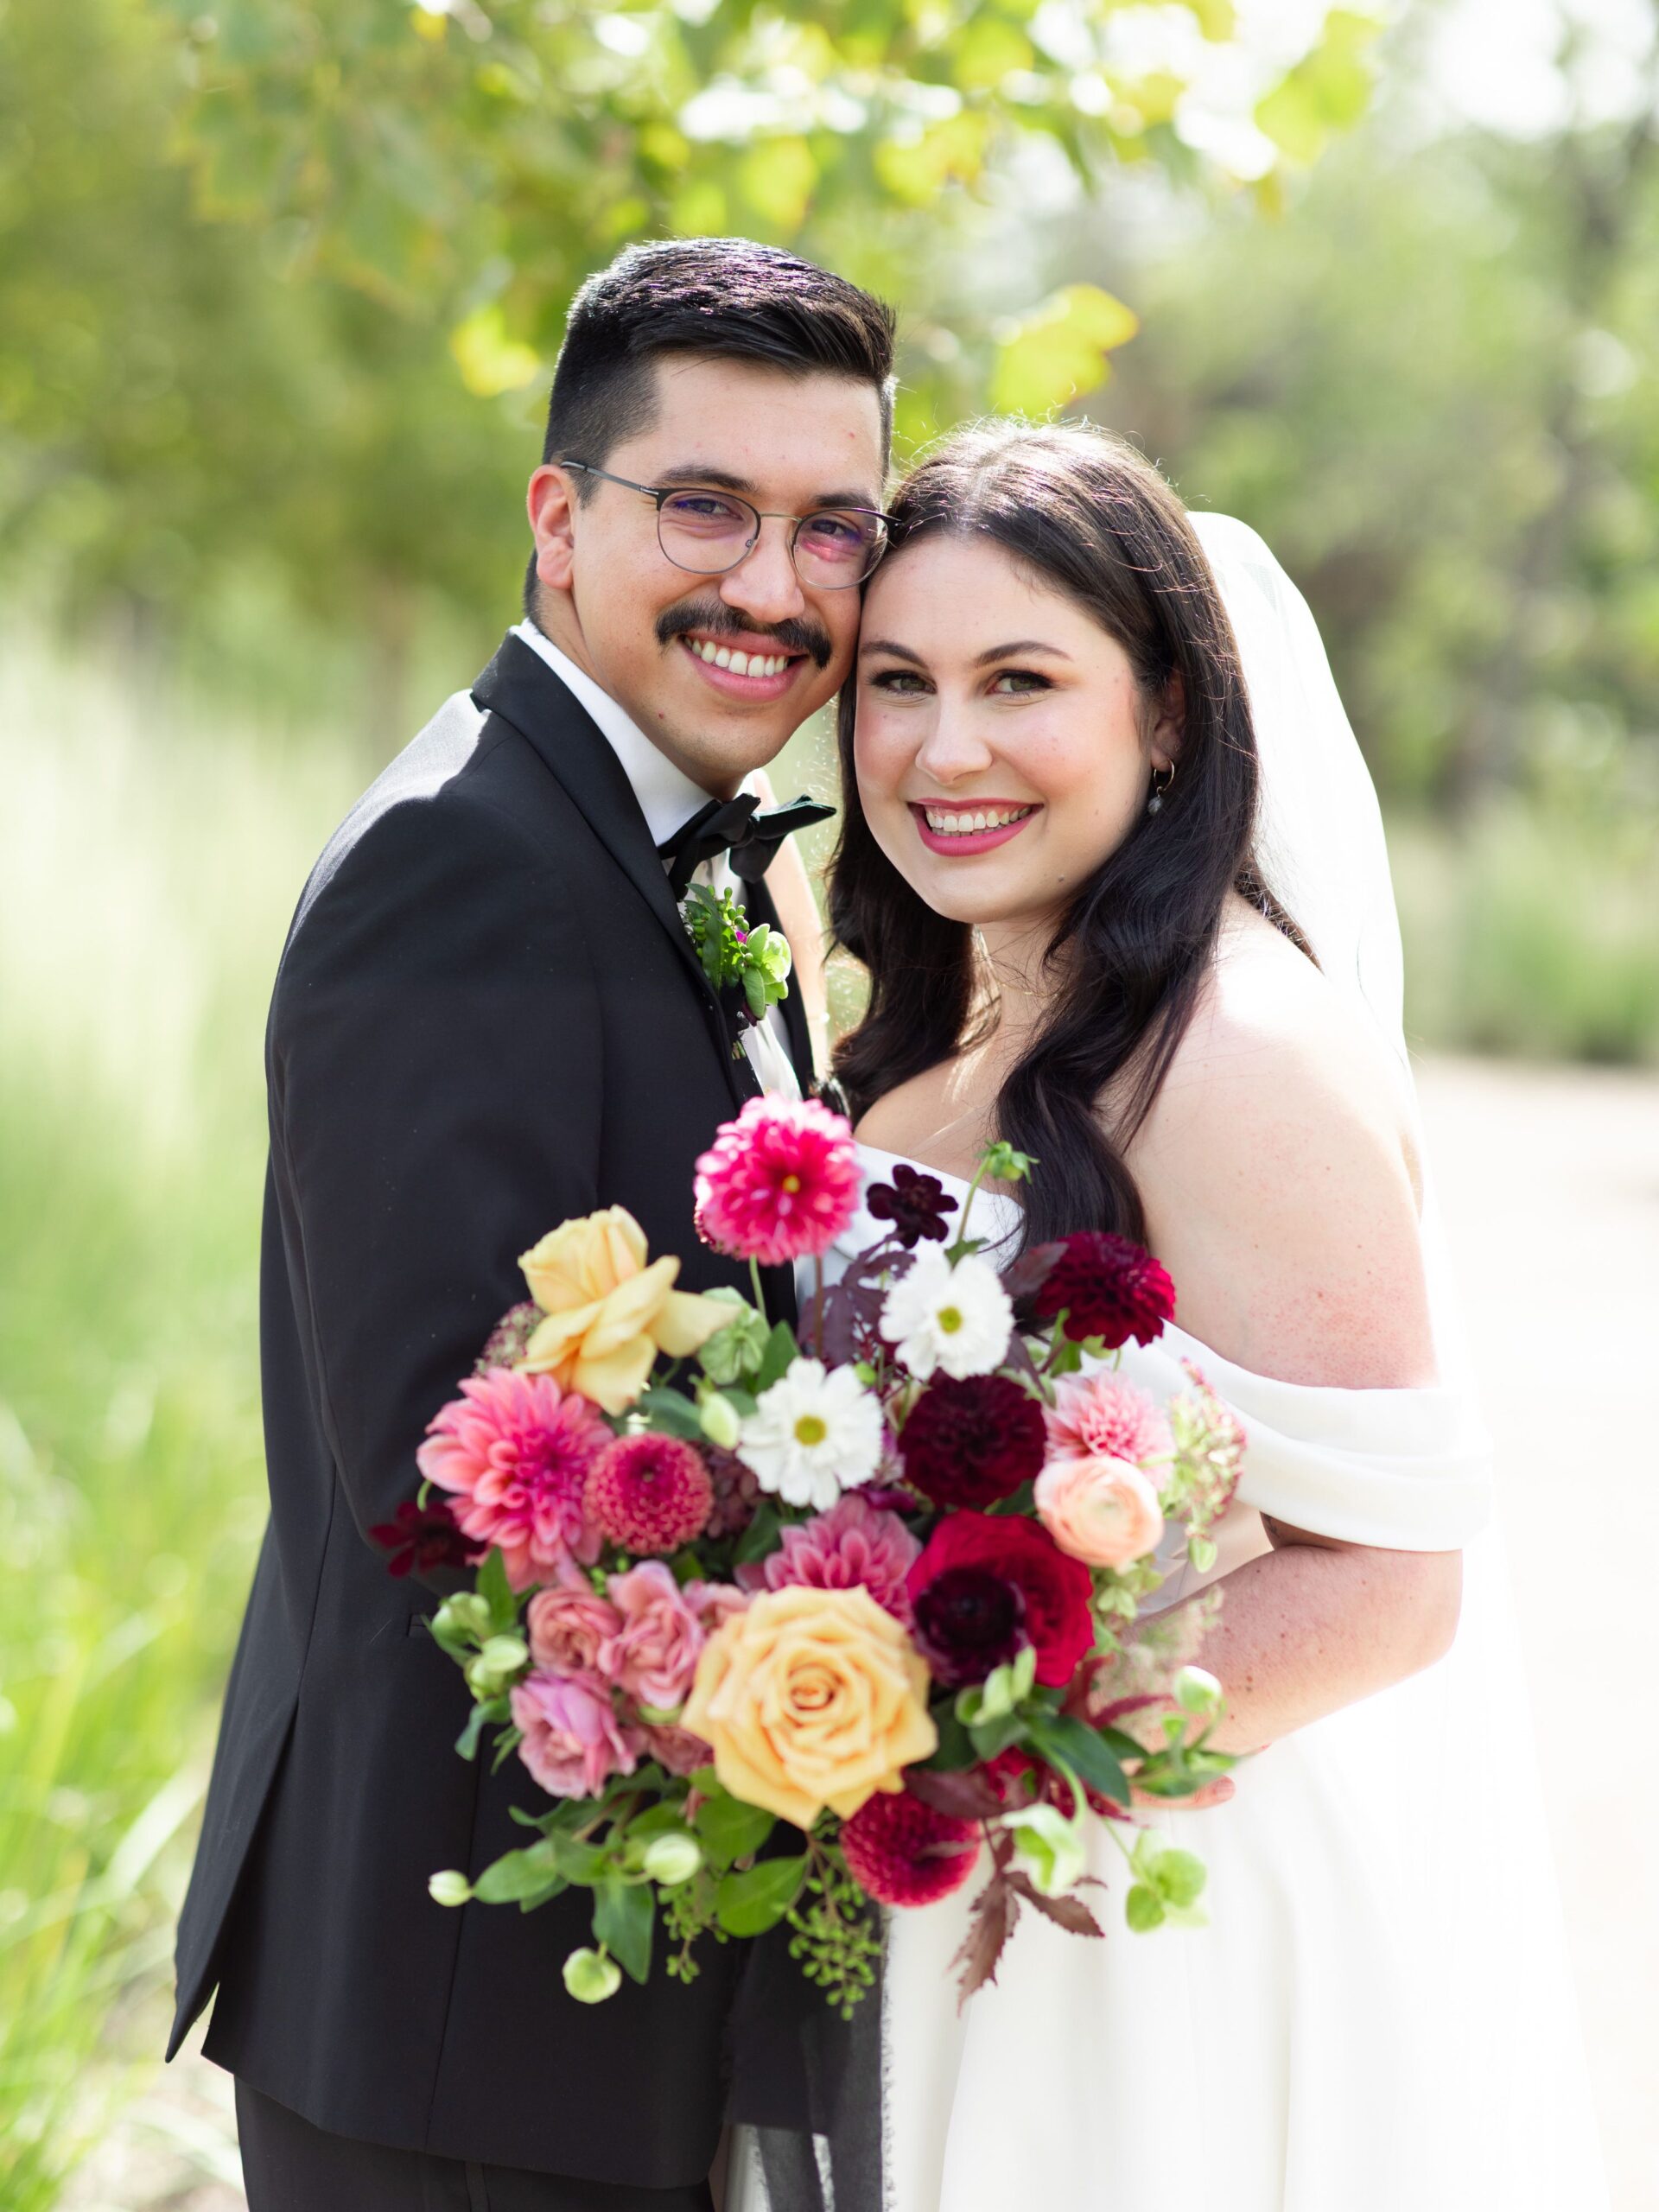 Bride and groom posting with burgundy and gold bridal bouquet